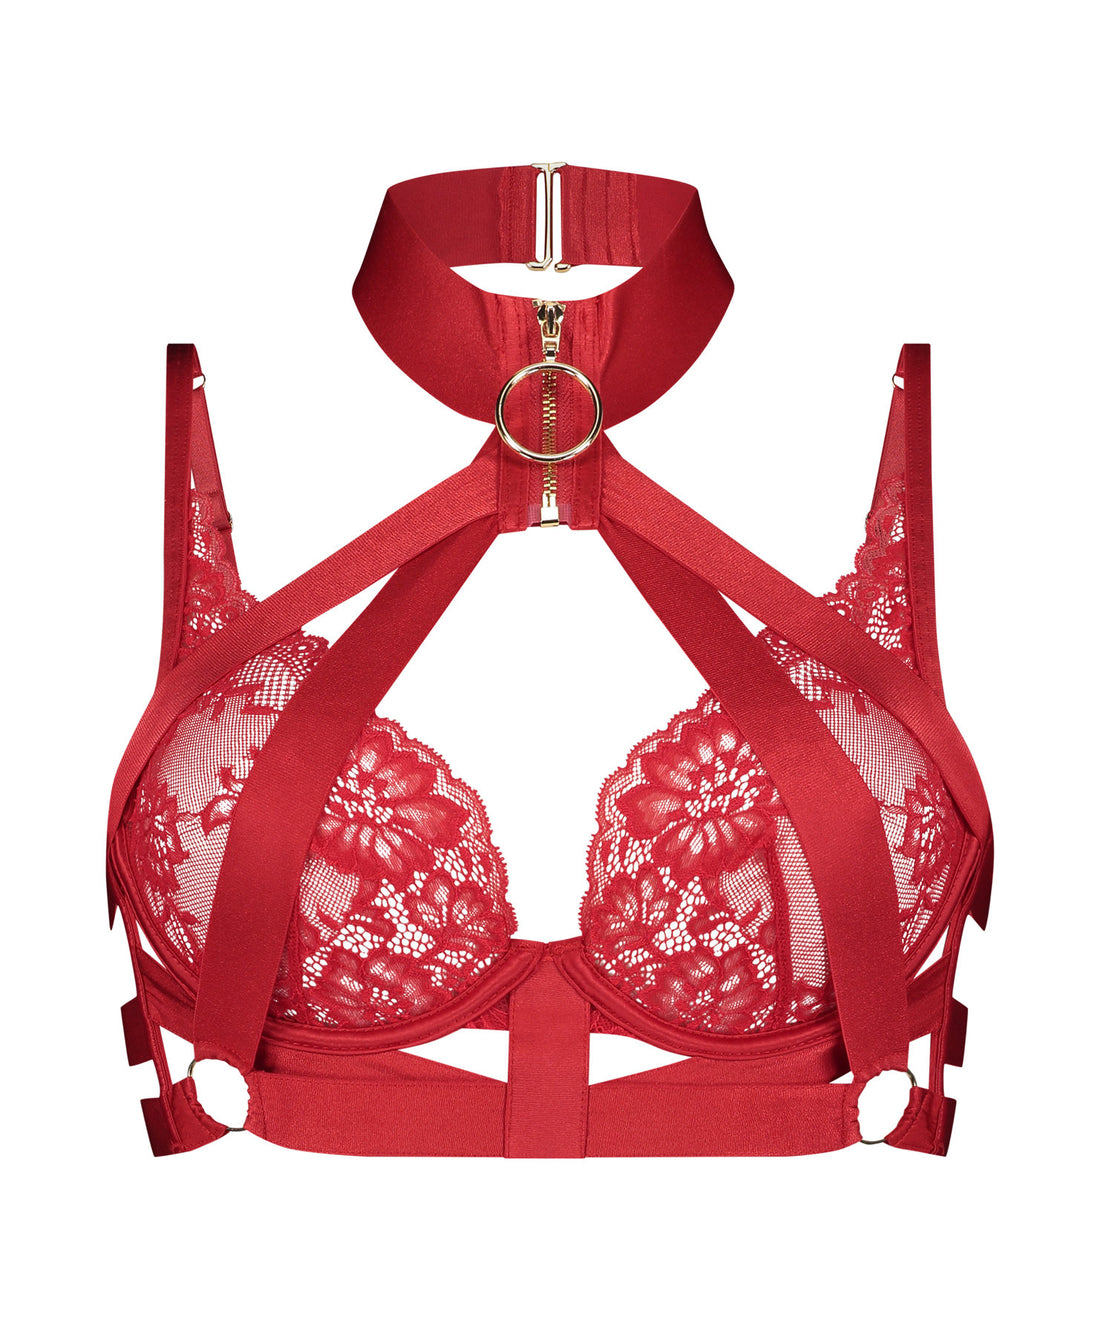 Clementine Up Bra In Different Cup Sizes_204480_Tango Red_01